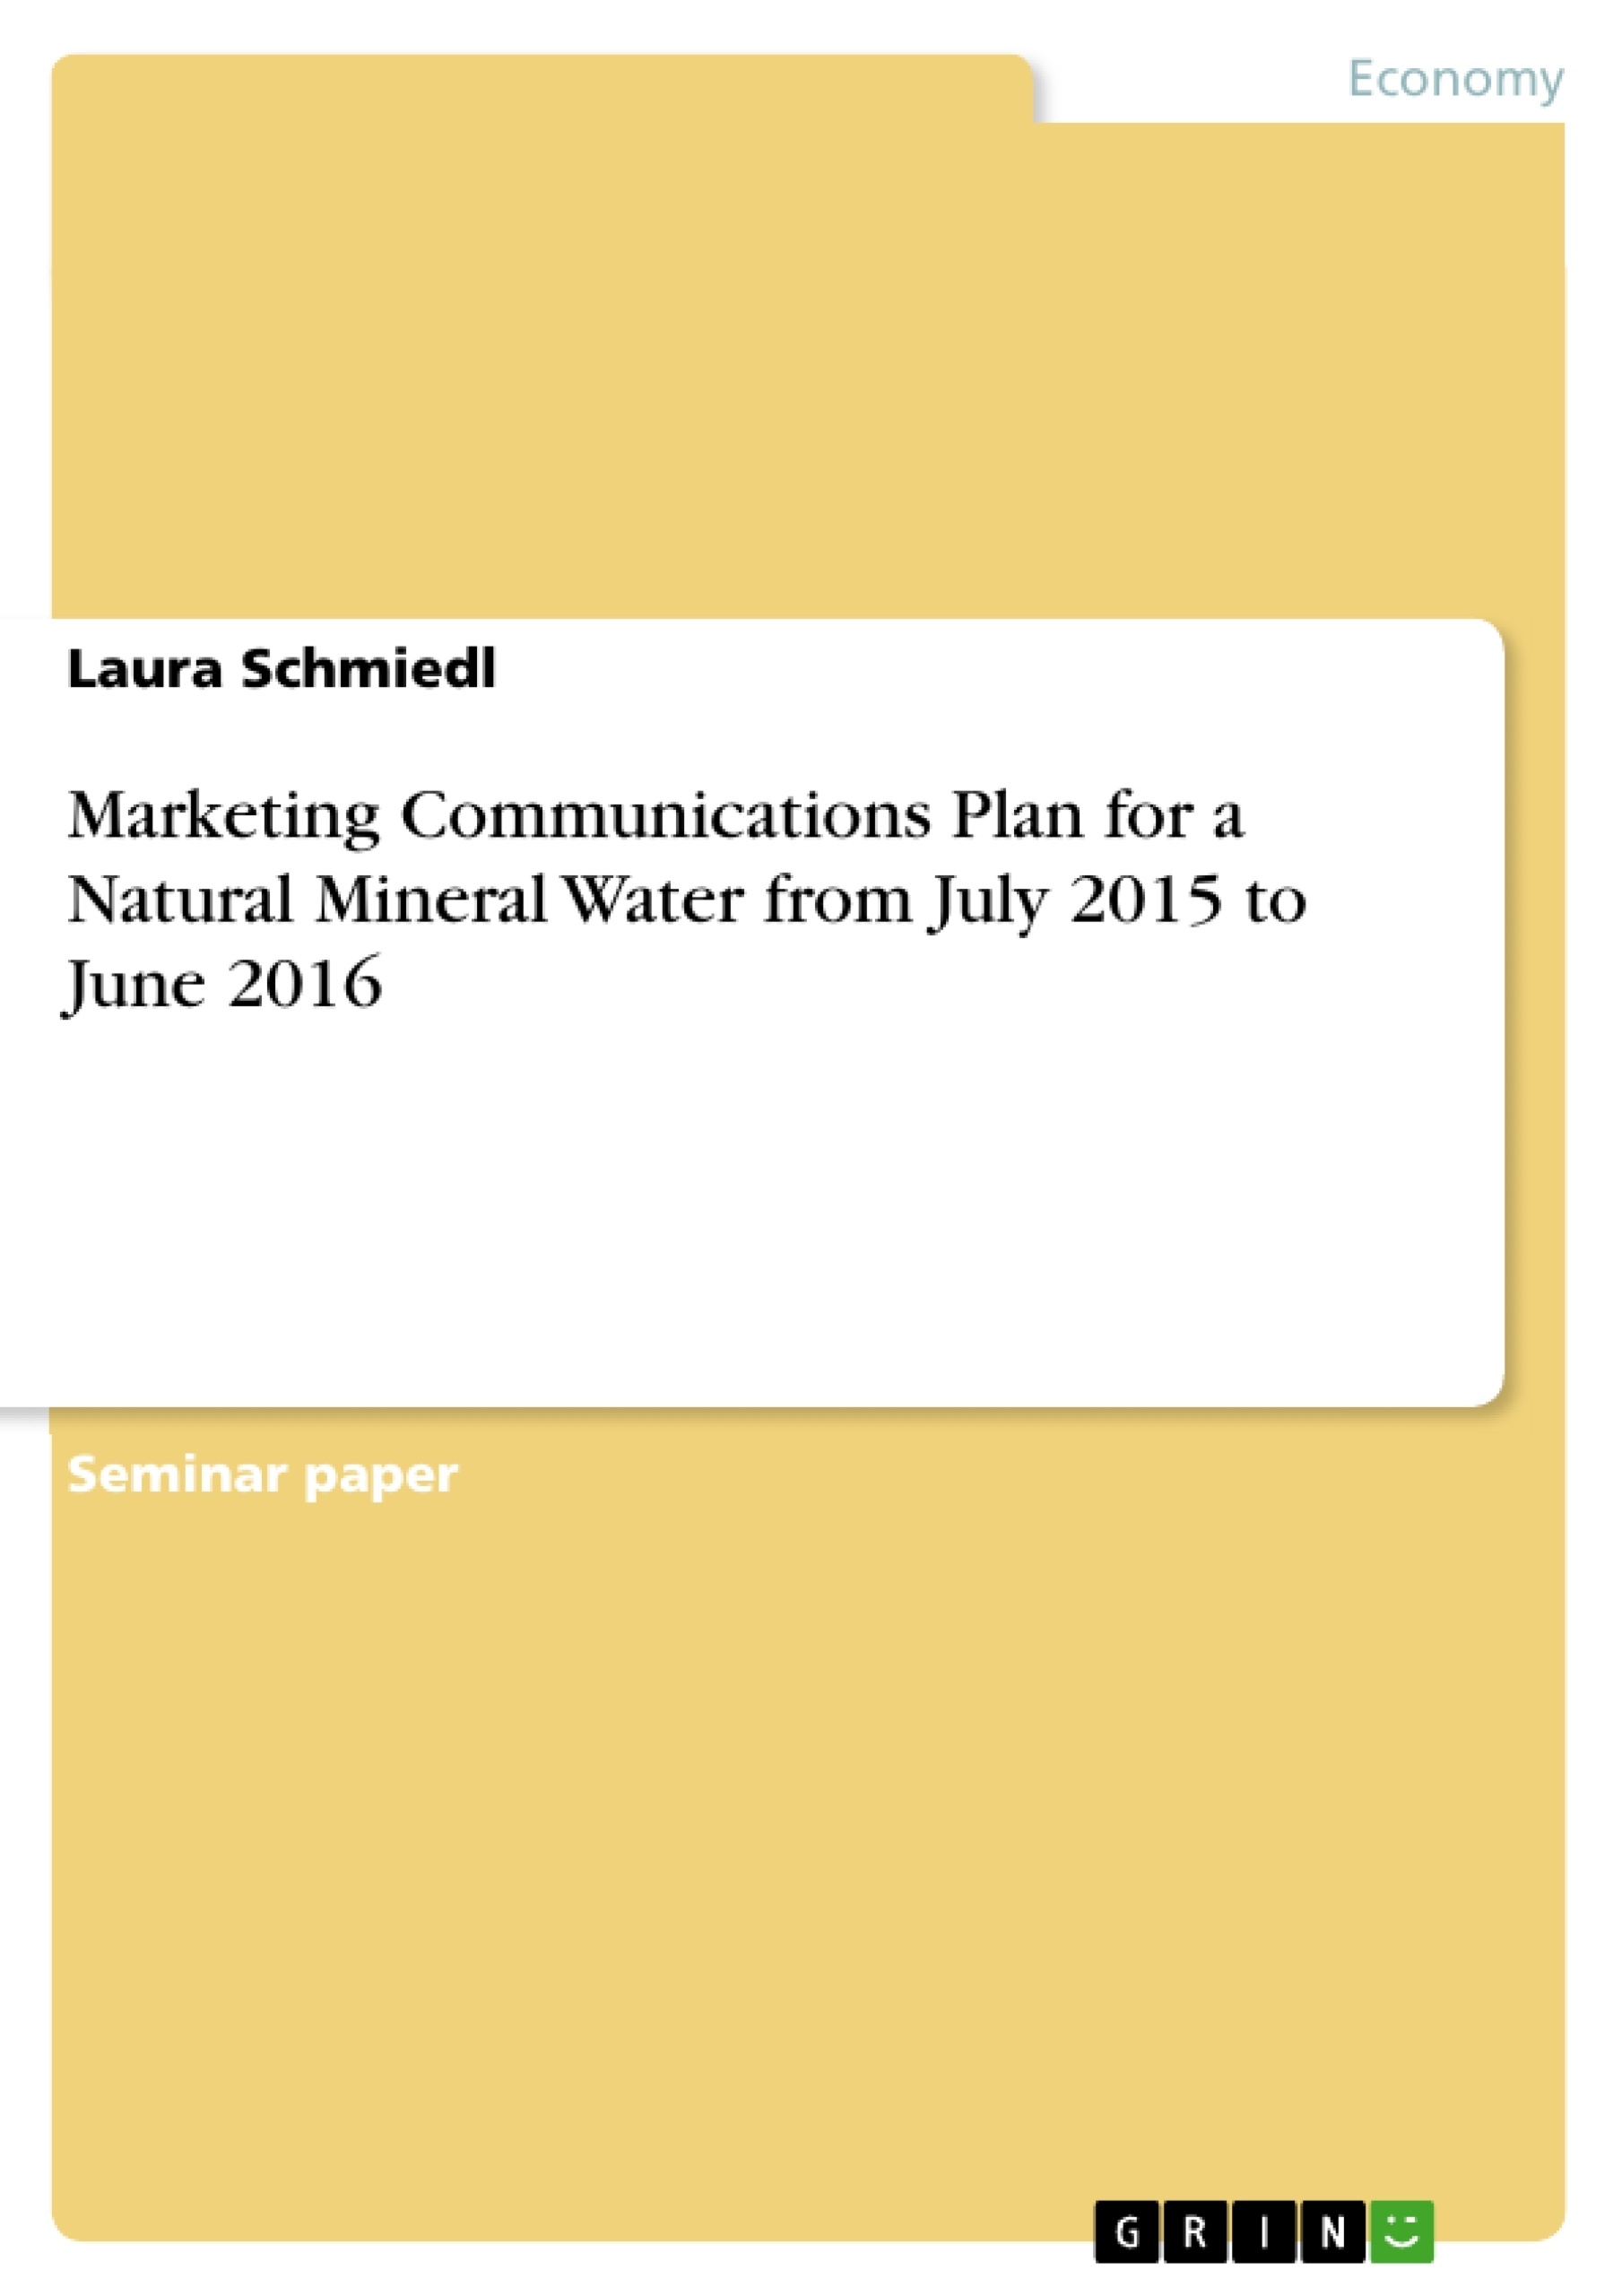 Titre: Marketing Communications Plan for a Natural Mineral Water from July 2015 to June 2016